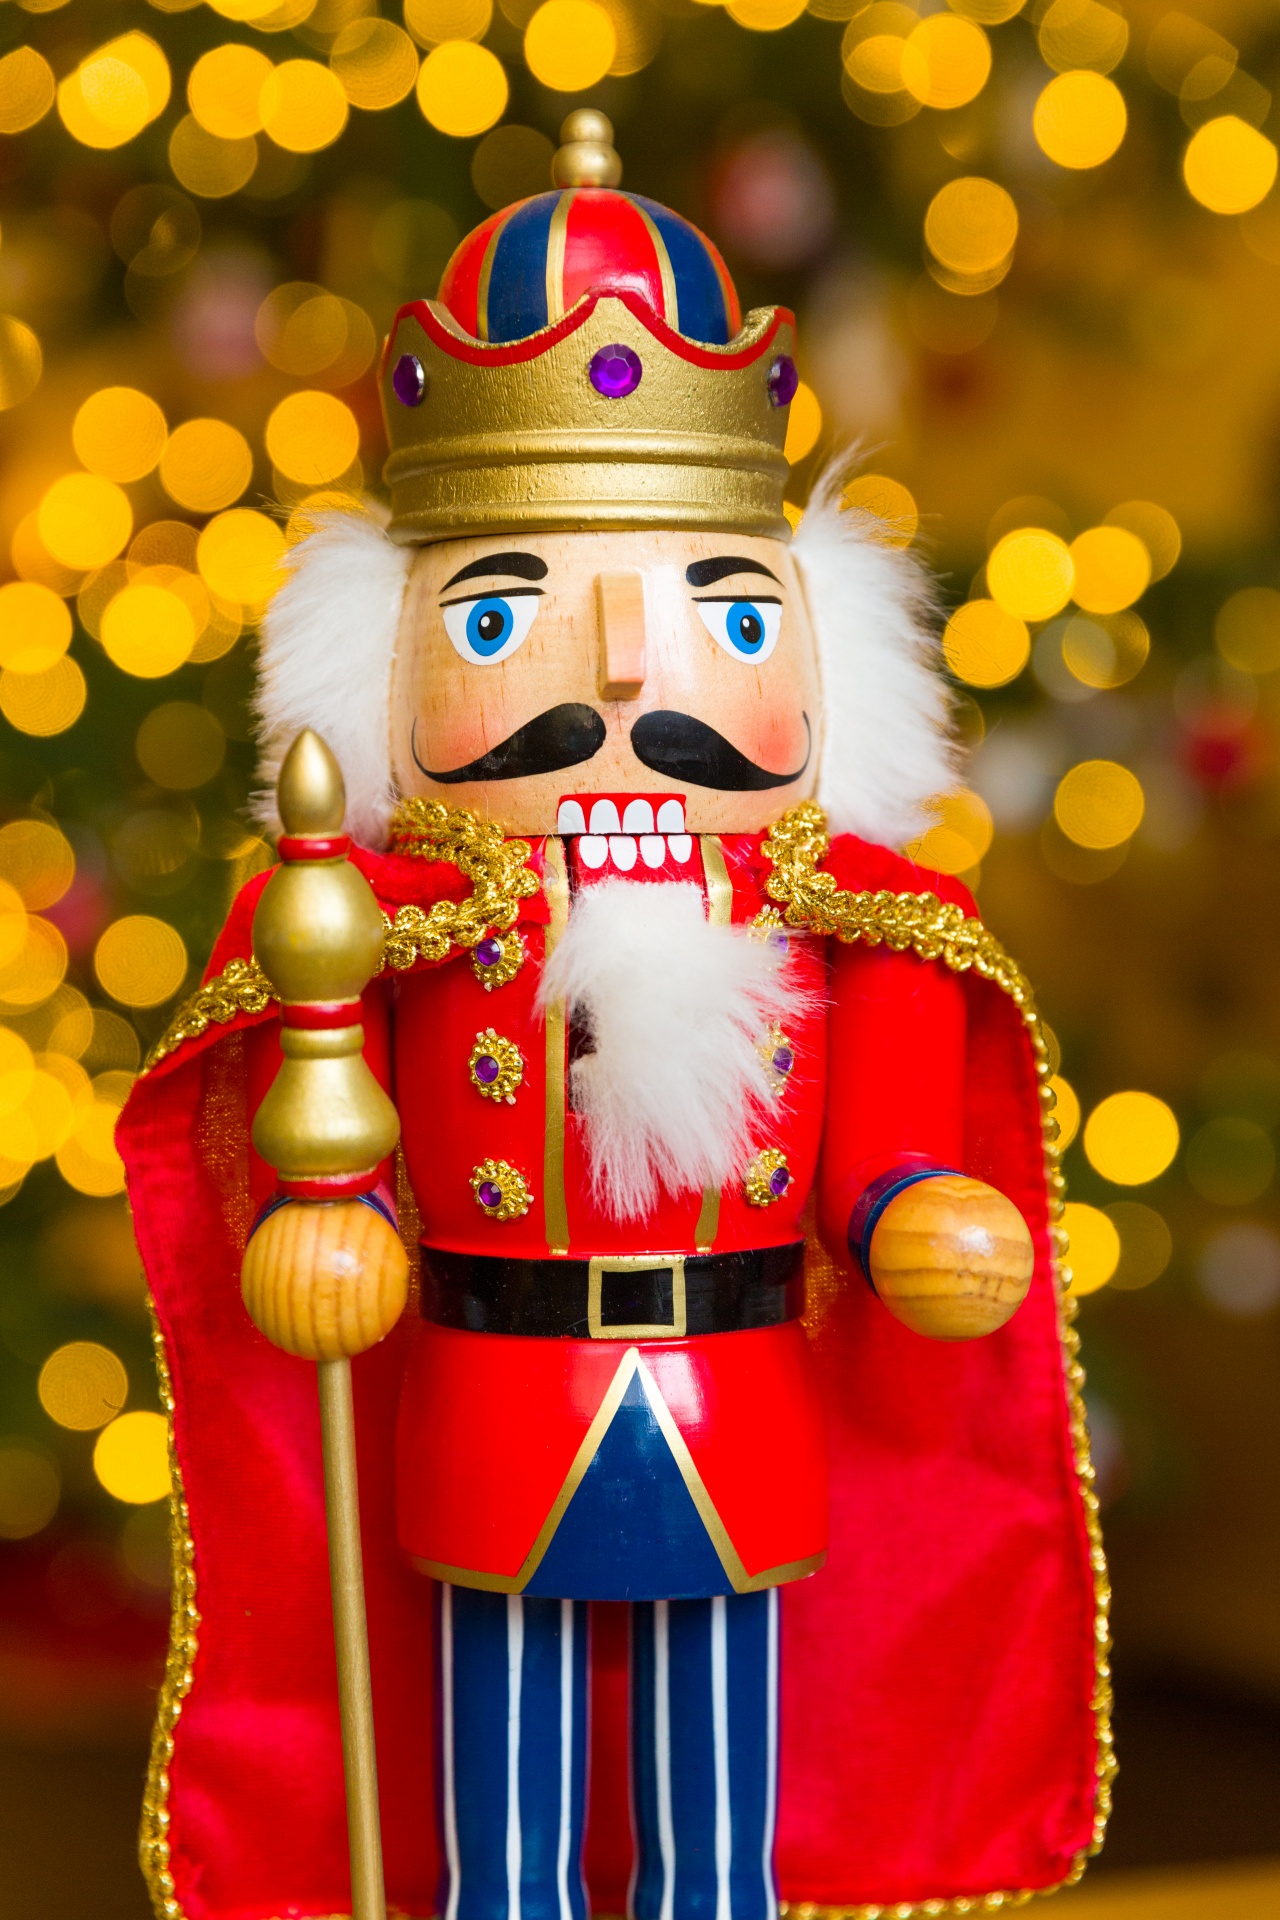 Christmas nutcracker soldier with blurred Christmas tree in the background